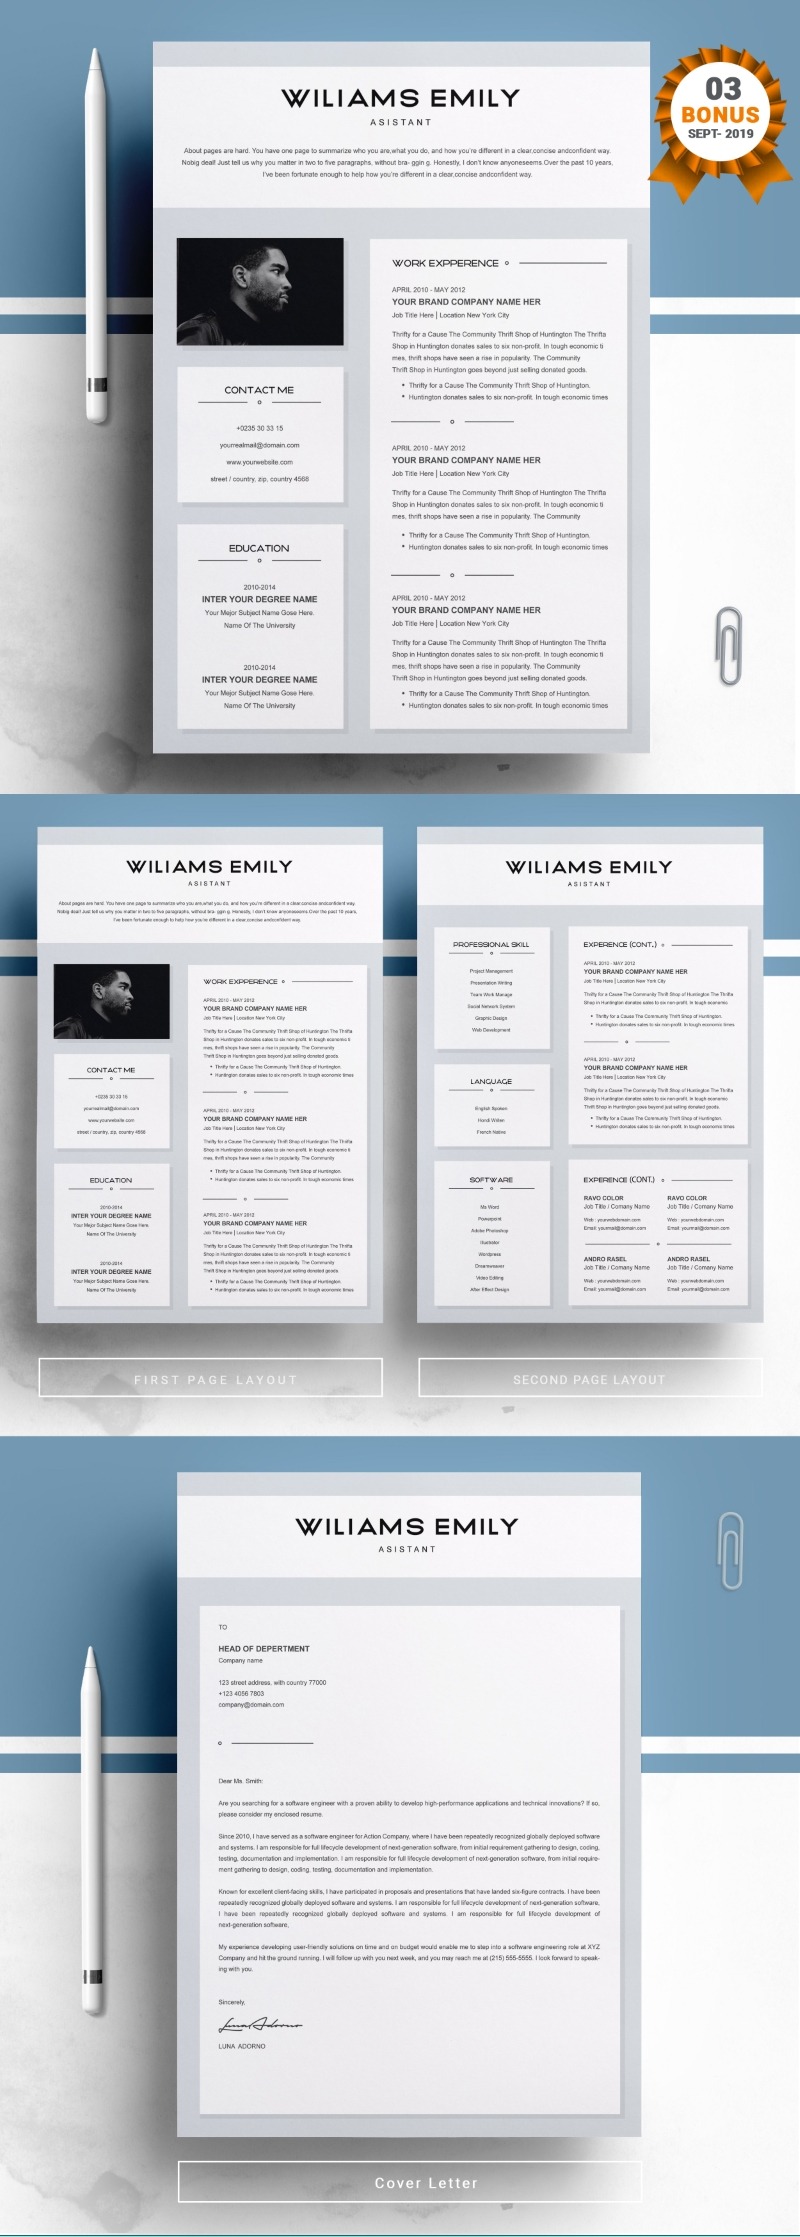 100 CV/Resume – Modern & Unique Layouts, Files in EPS, PSD, DOCX & Apple Pages | Bypeople